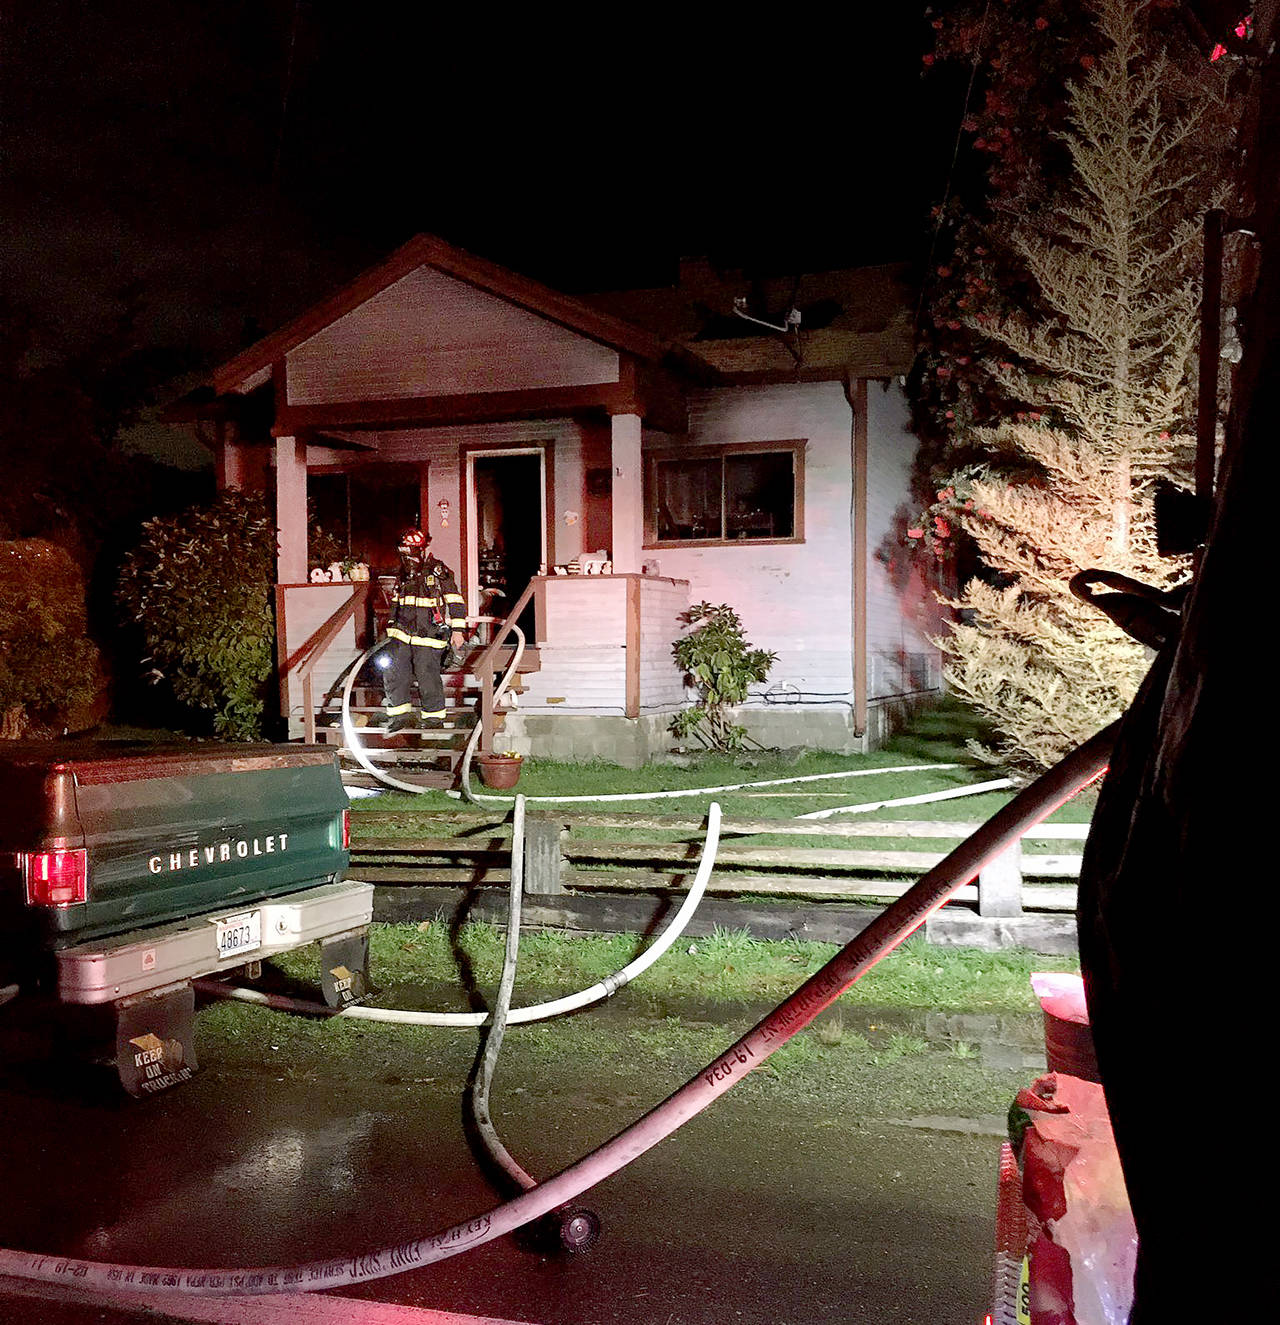 A person suffered minor injuries in a house fire late Tuesday evening in Everett. (Everett Fire Department)